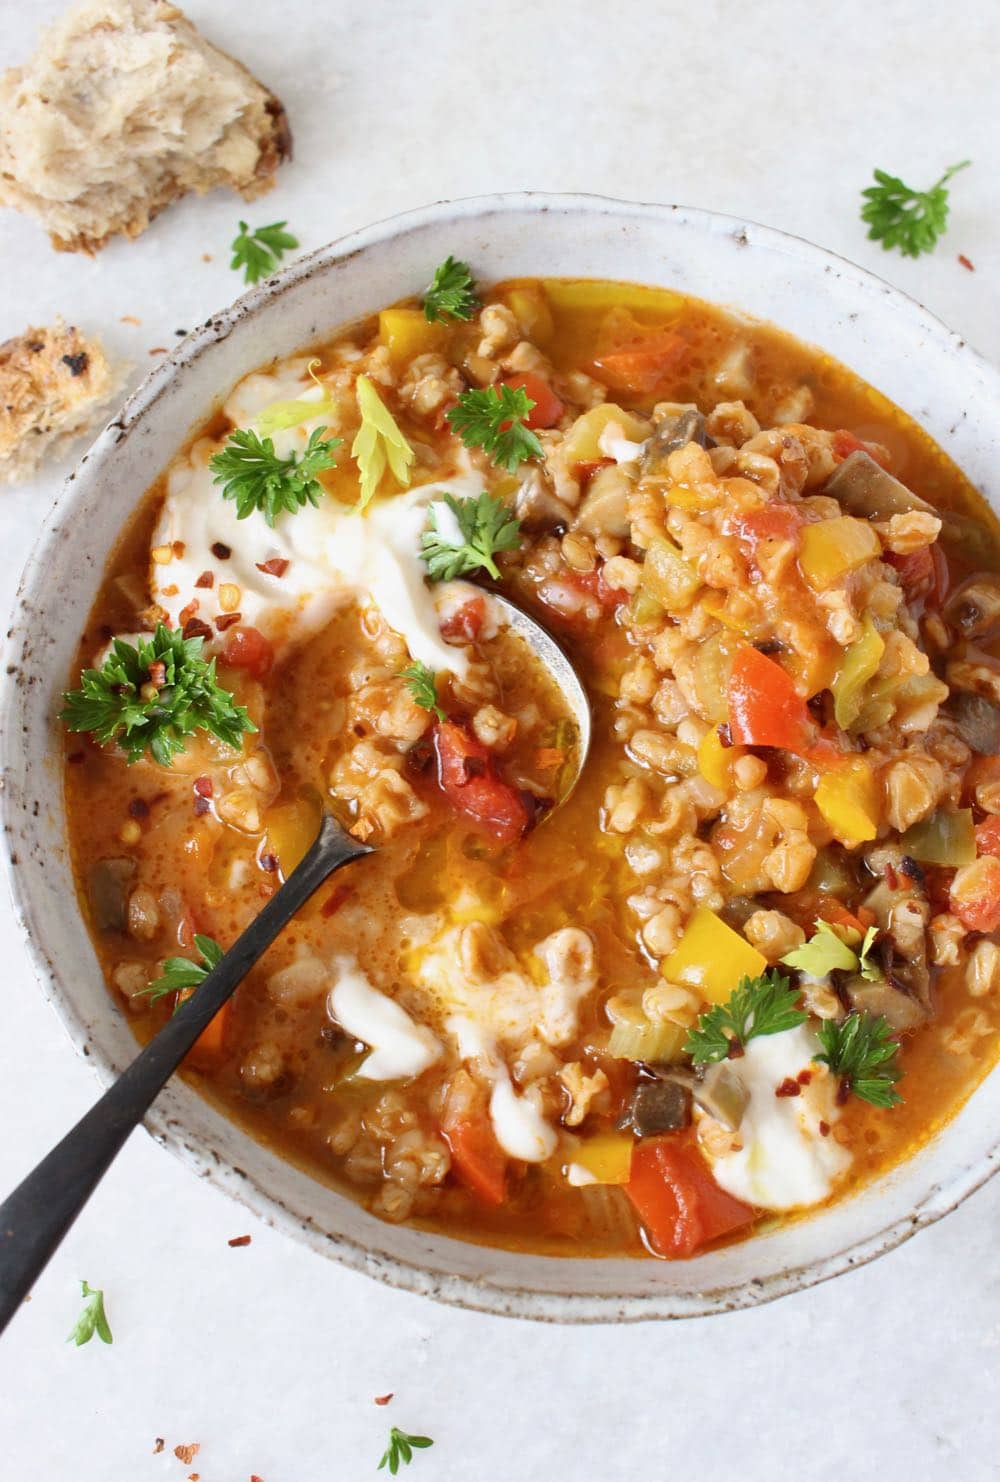 Best Vegan Unstuffed Bell Pepper Soup with Tomato Broth